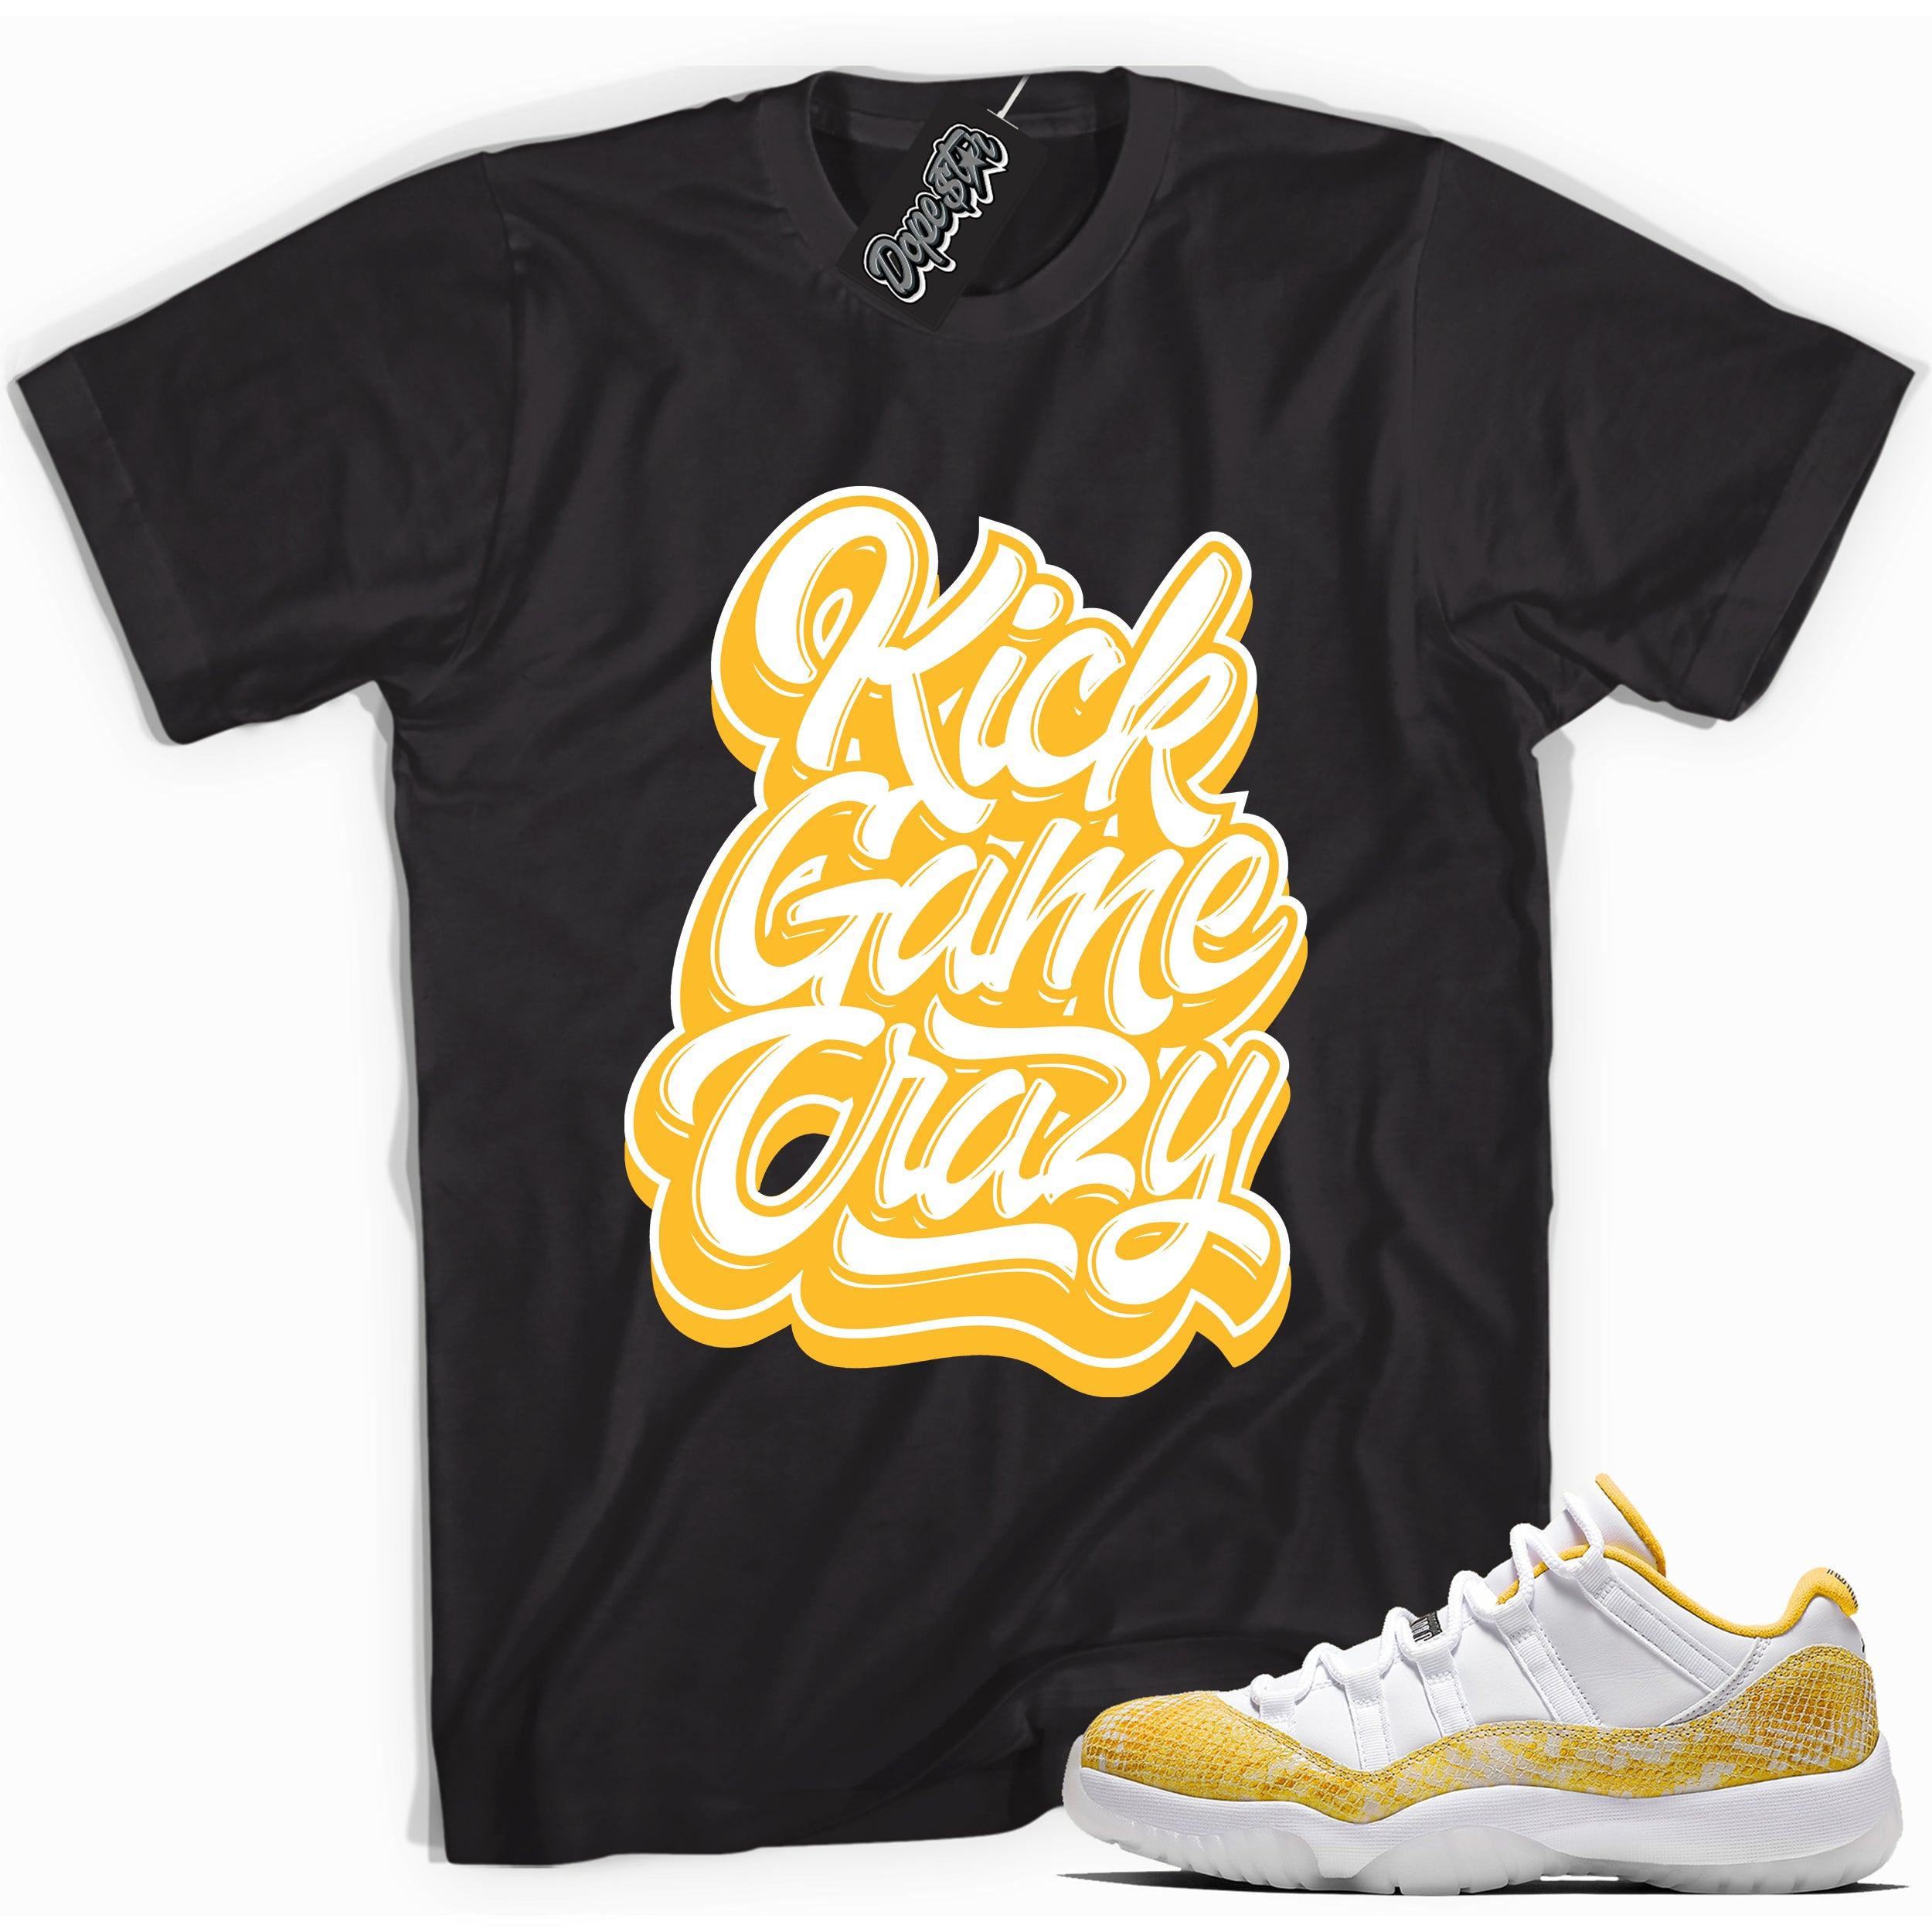 Cool black graphic tee with 'kick game crazy' print, that perfectly matches  Air Jordan 11 Low Yellow Snakeskin sneakers